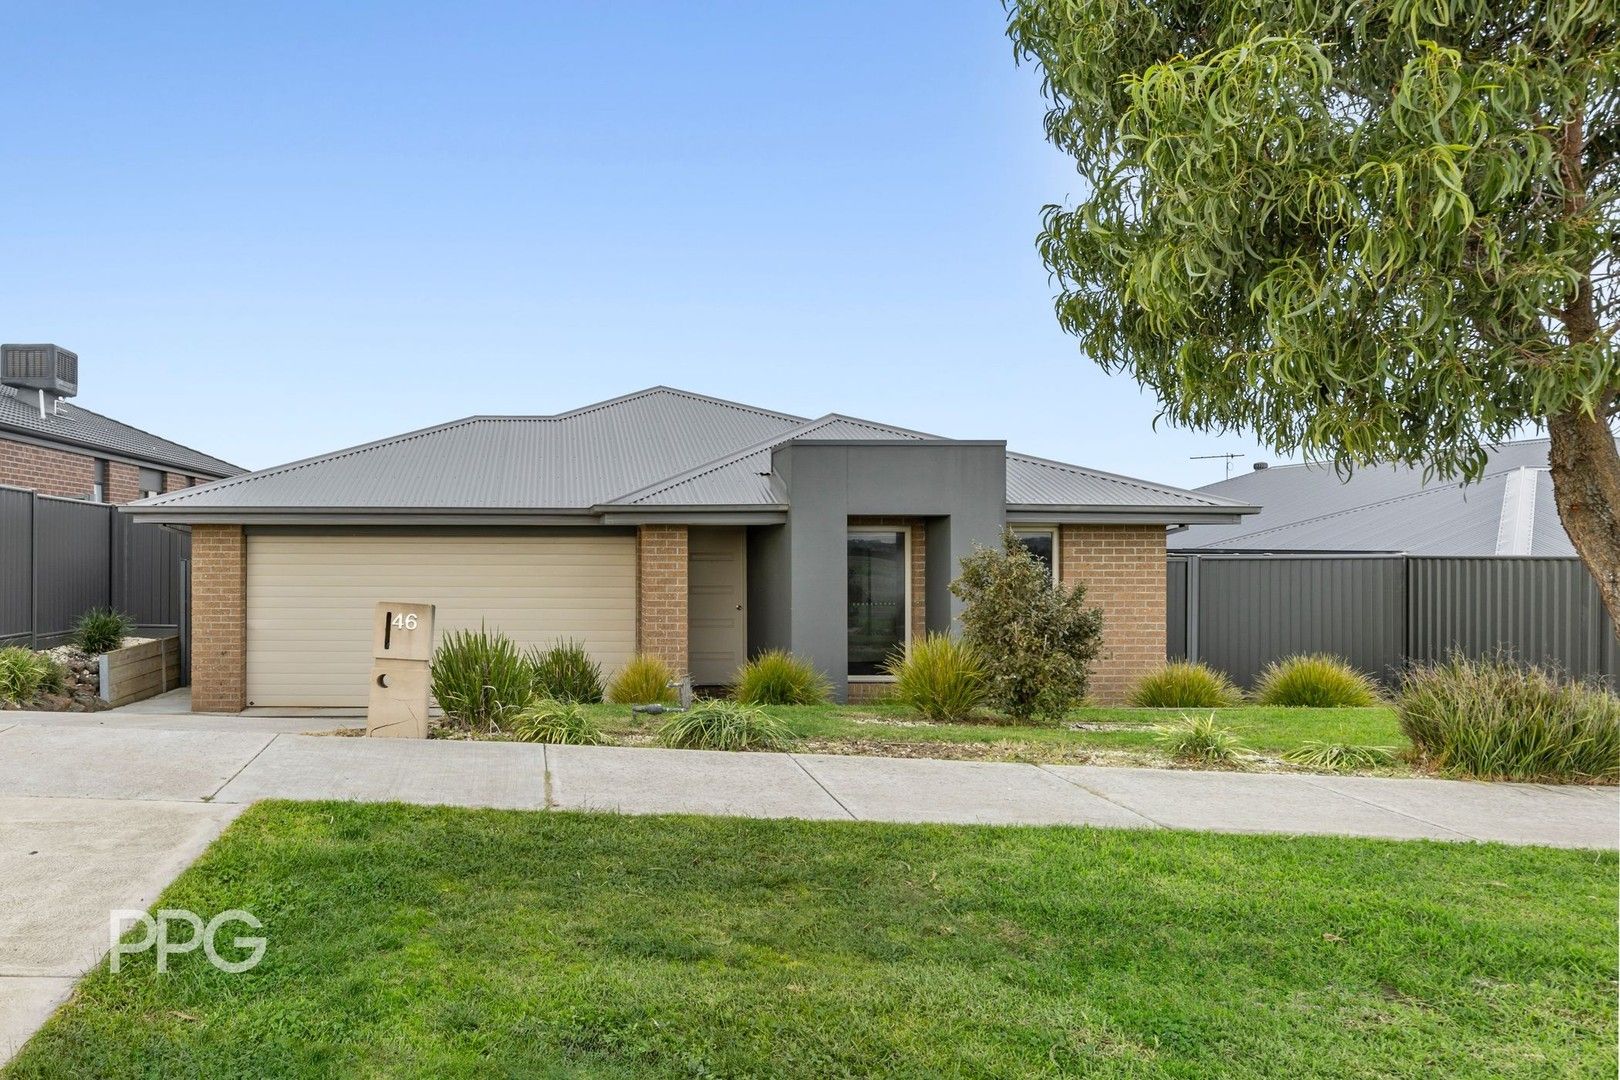 46 Greenvale Drive, Curlewis VIC 3222 | Domain